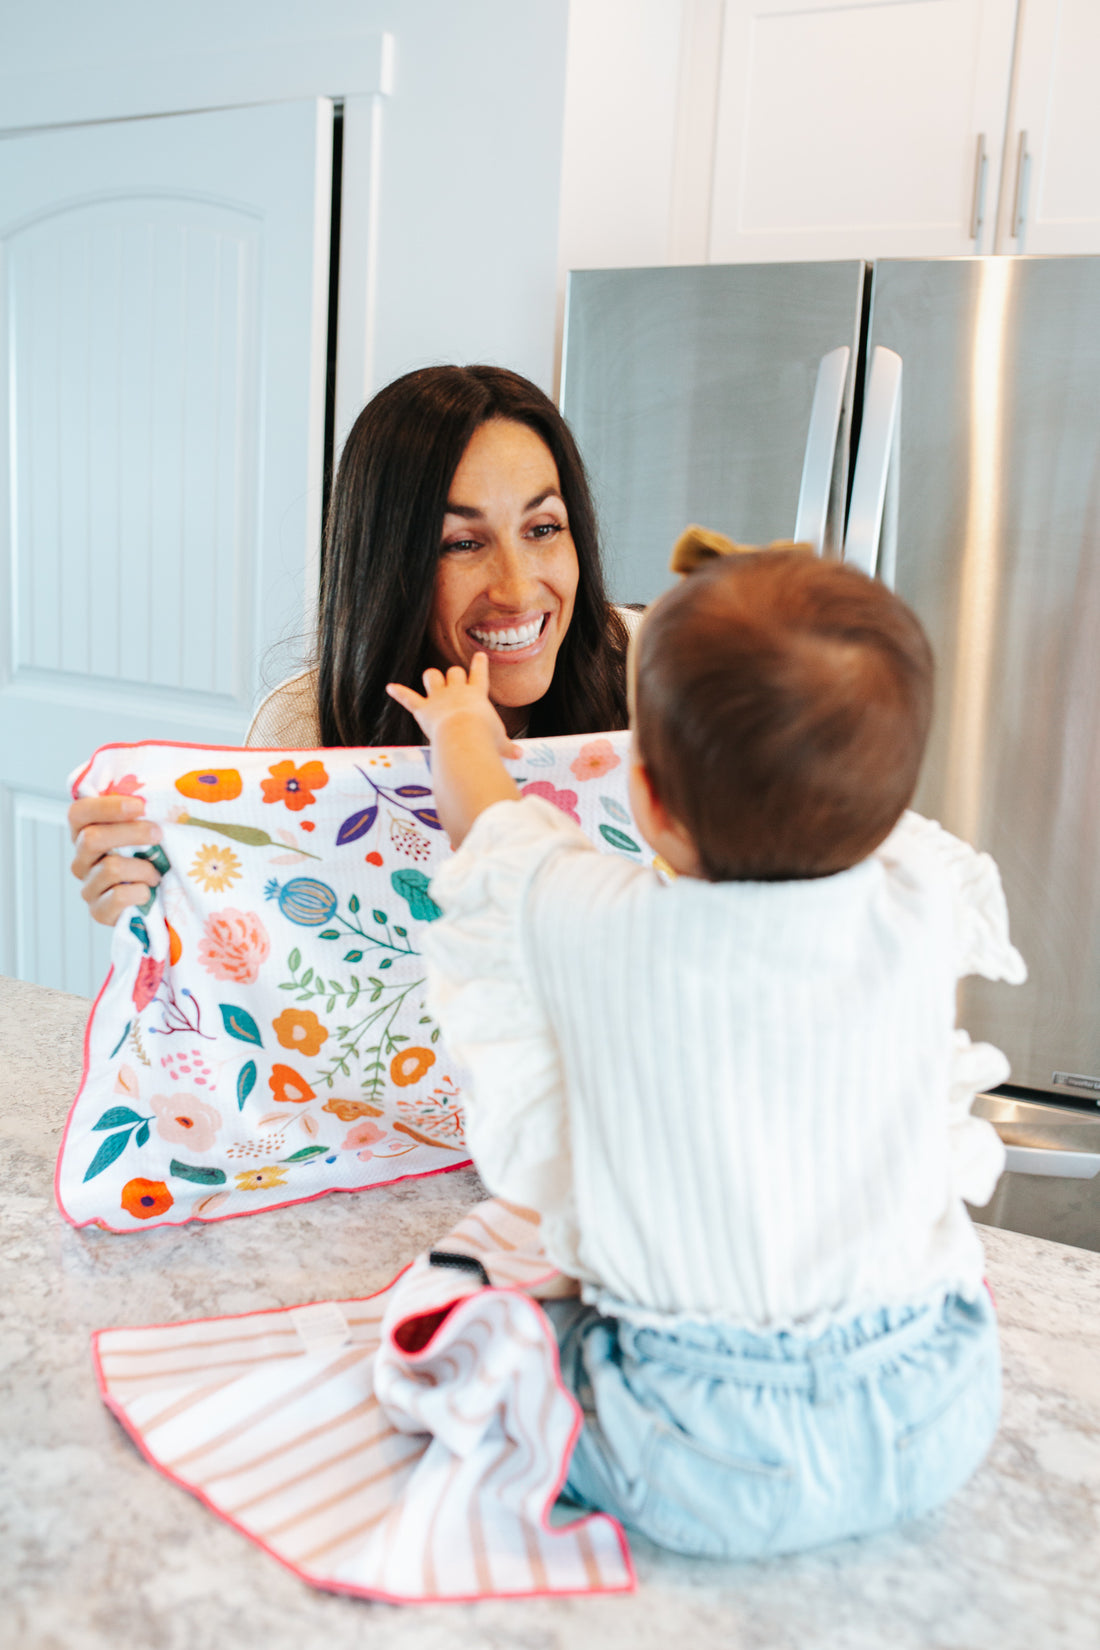 Keep the kitchen clean with your little ones